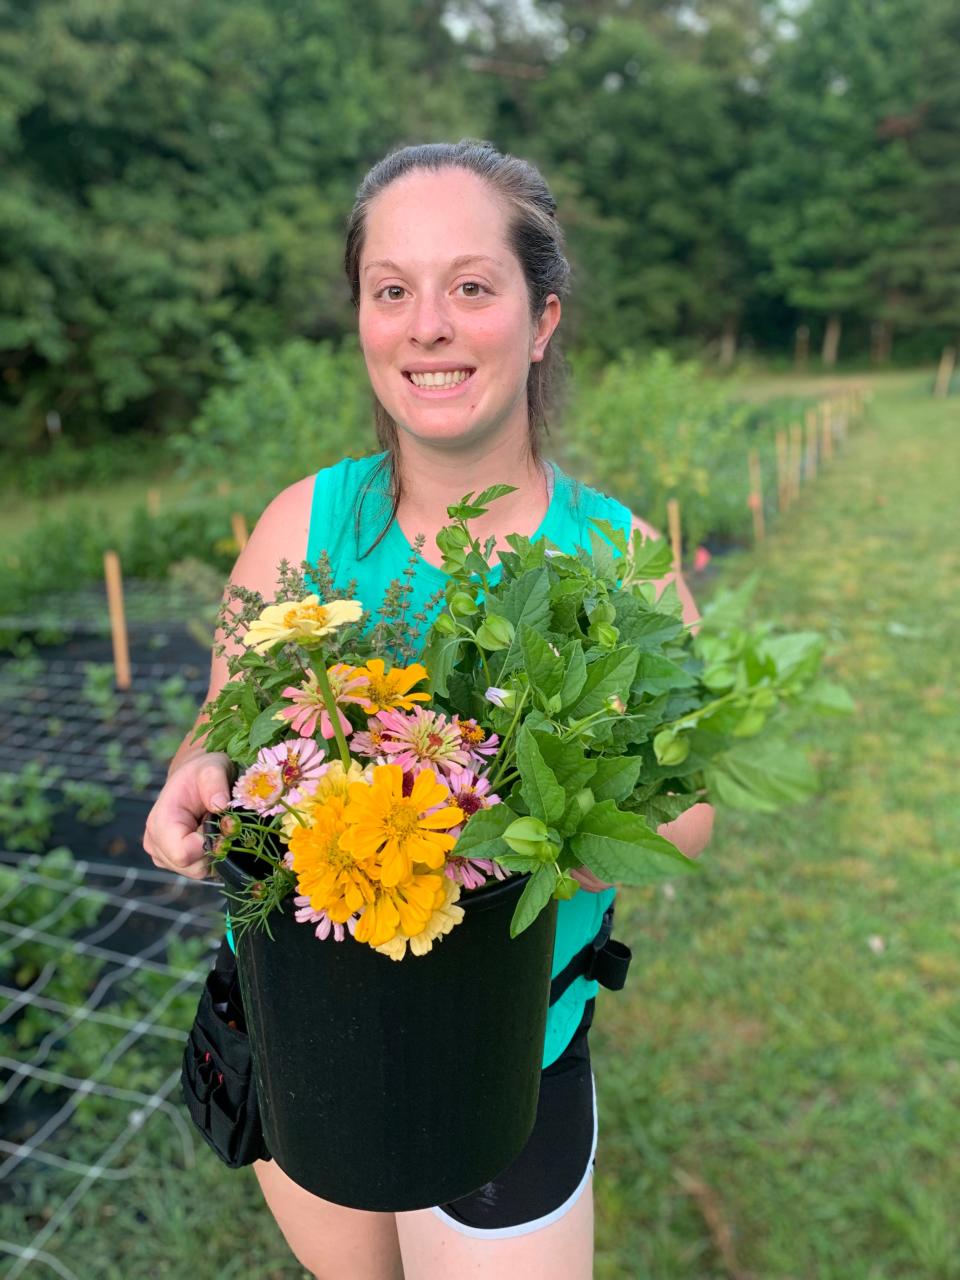 Finding the right combination of flowers is important for Laurie Whitefoot at her home-grown business, Glory Flower Farm.